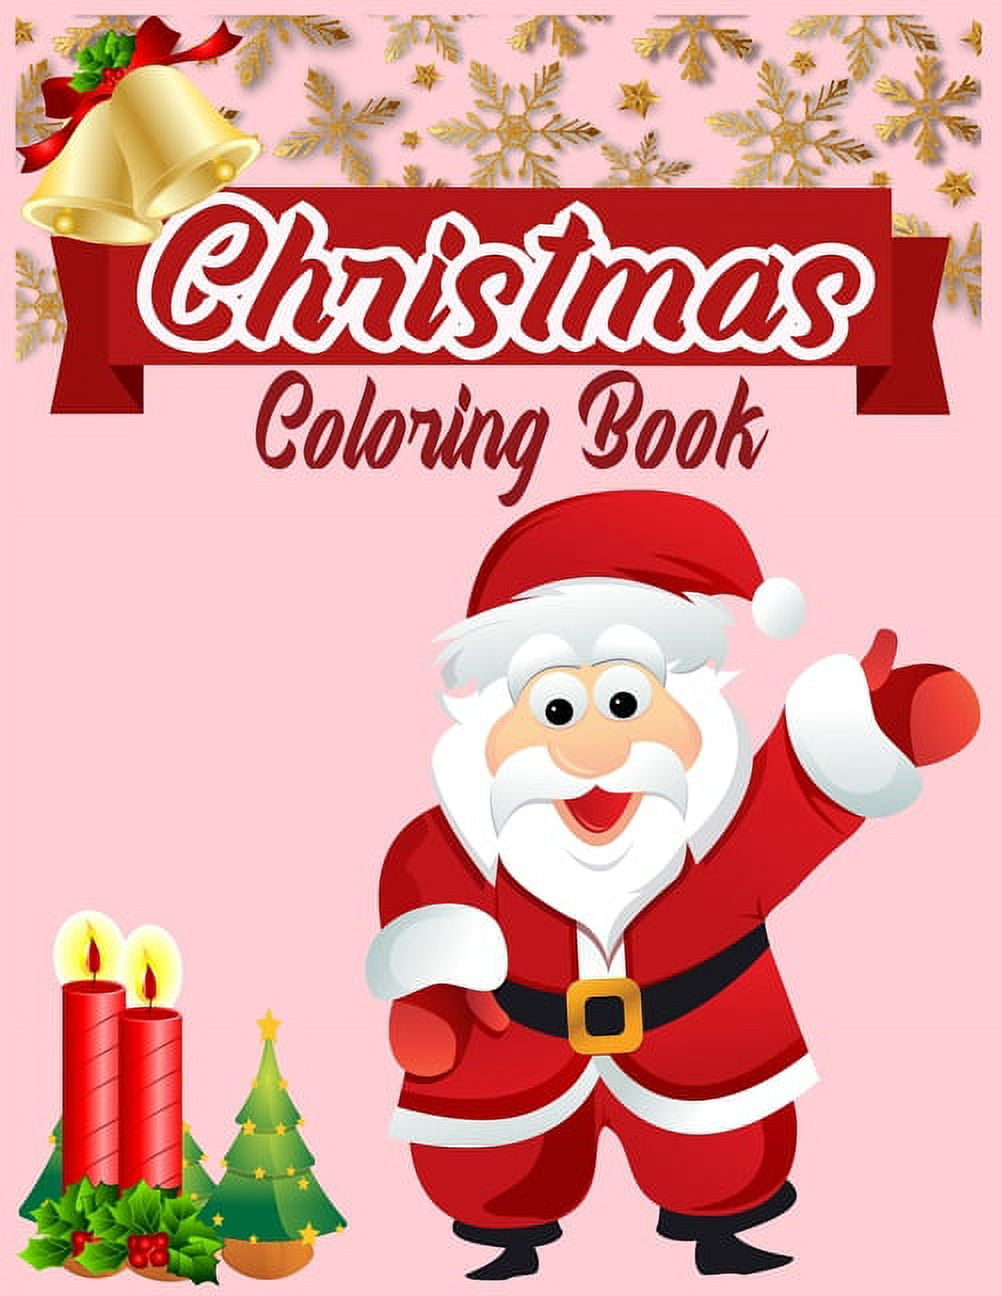 Christmas Coloring Books For Kids: Children Coloring and Activity Books for Kids  Ages 2-4, 4-8, Boys, Girls, Christmas Ideals (Paperback)